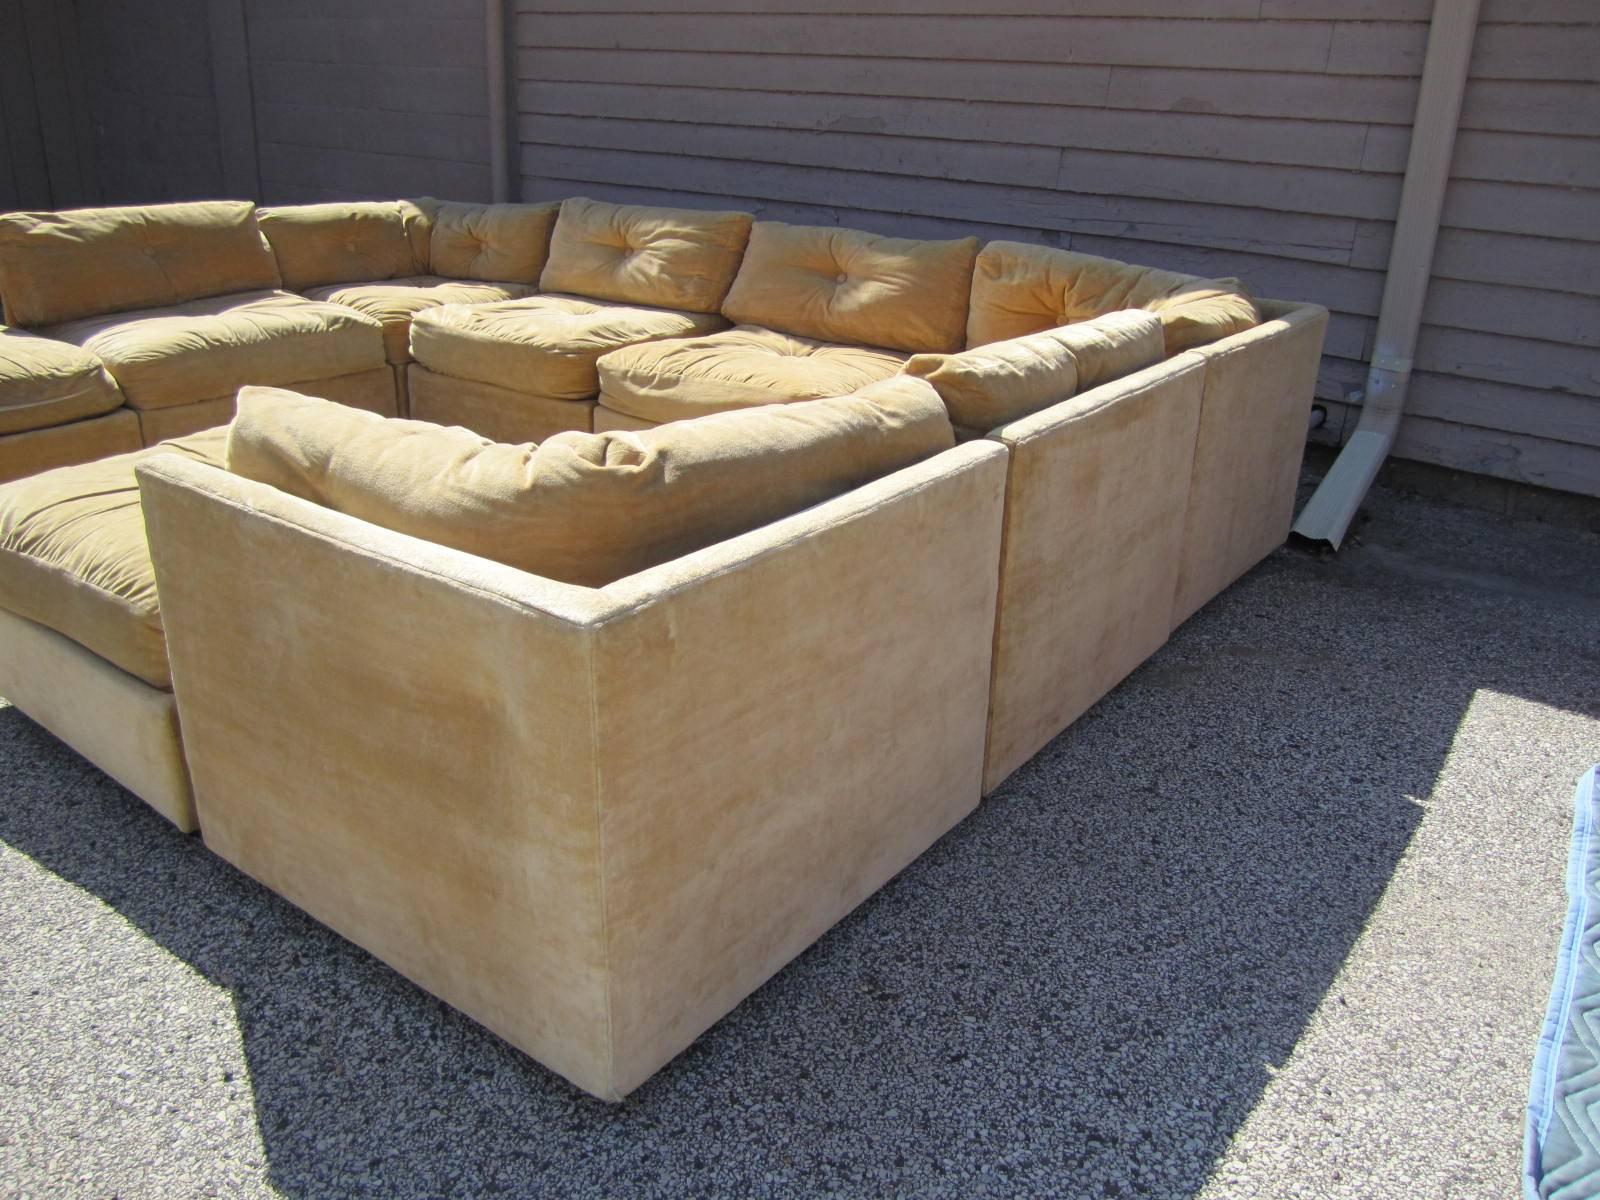 Fabulous nine-piece Milo Baughman style cube sectional sofa. These pieces retain their original tan velvet in usable condition-reupholstery recommended. The sofa sections have wonderful wooden legs and the two ottomans have castors. Each piece